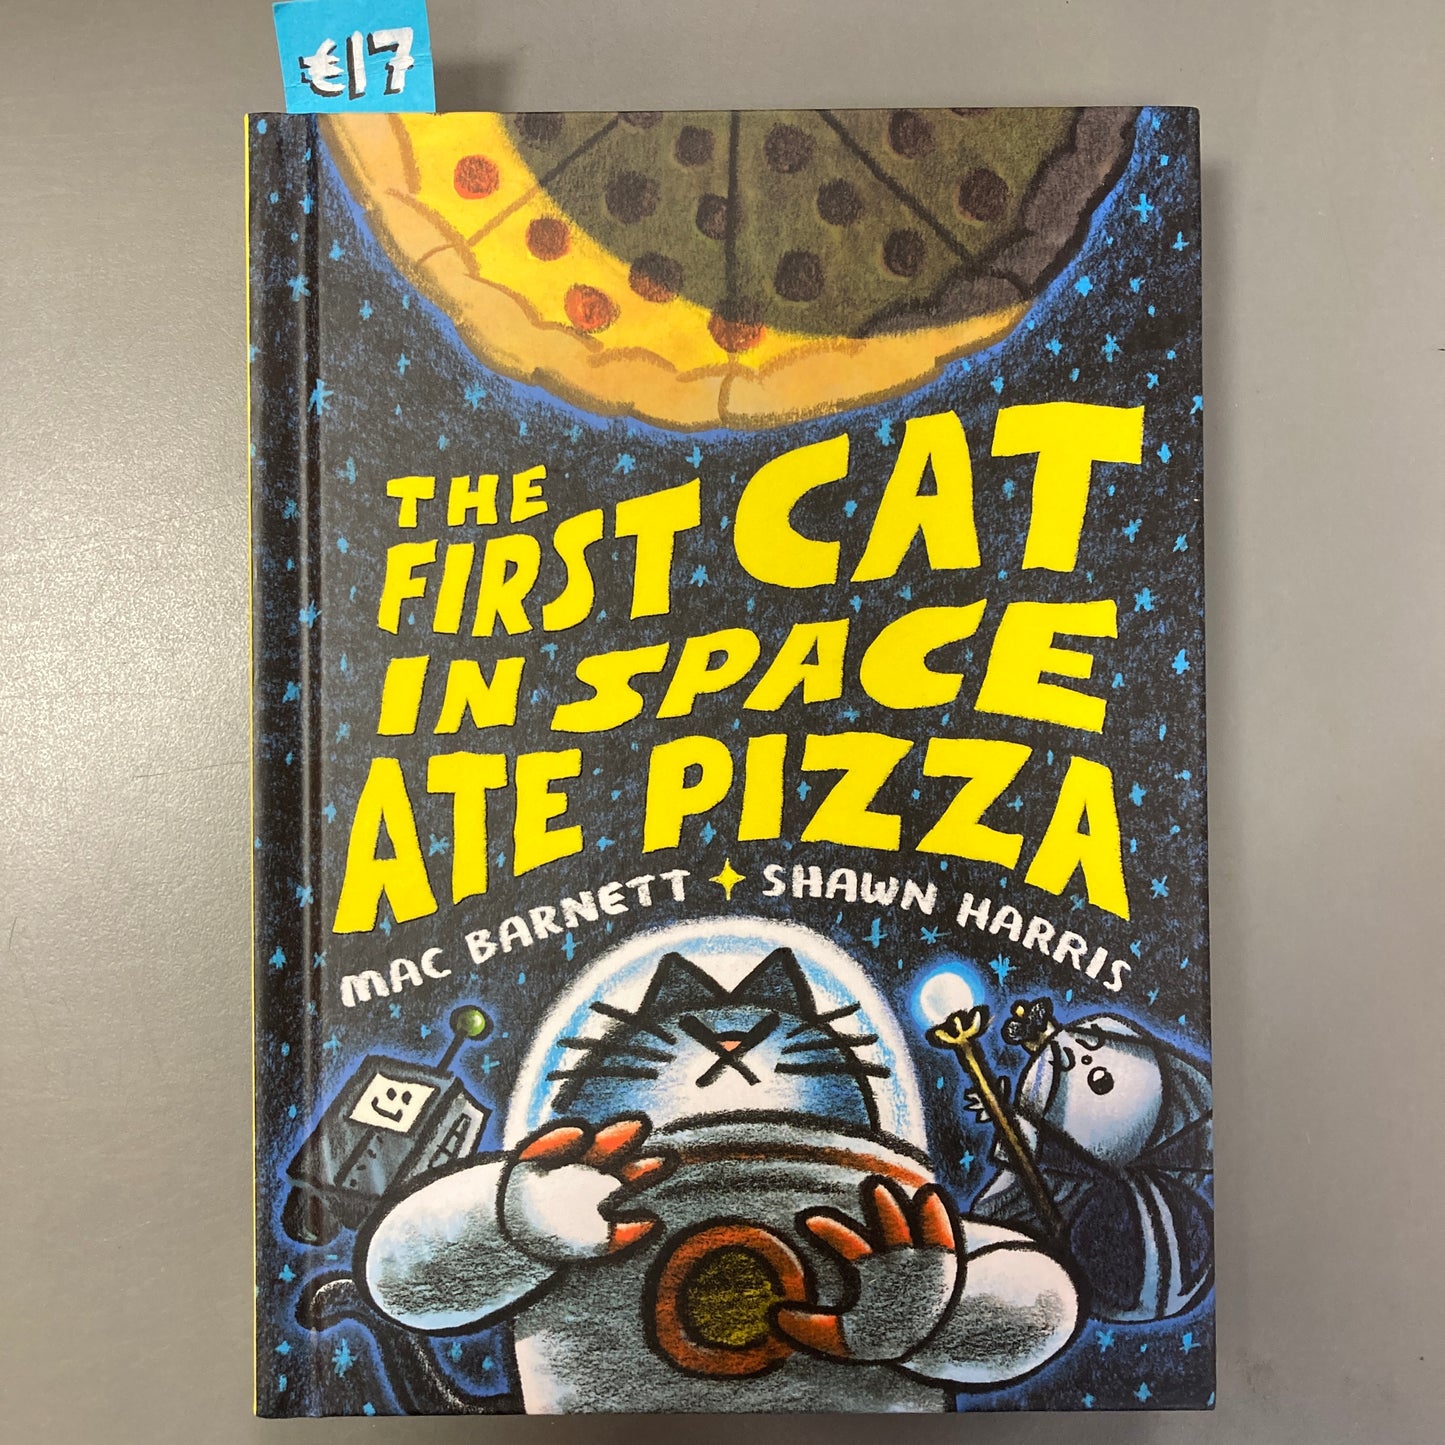 The First Cat in Space Ate Pizza (Hardcover)